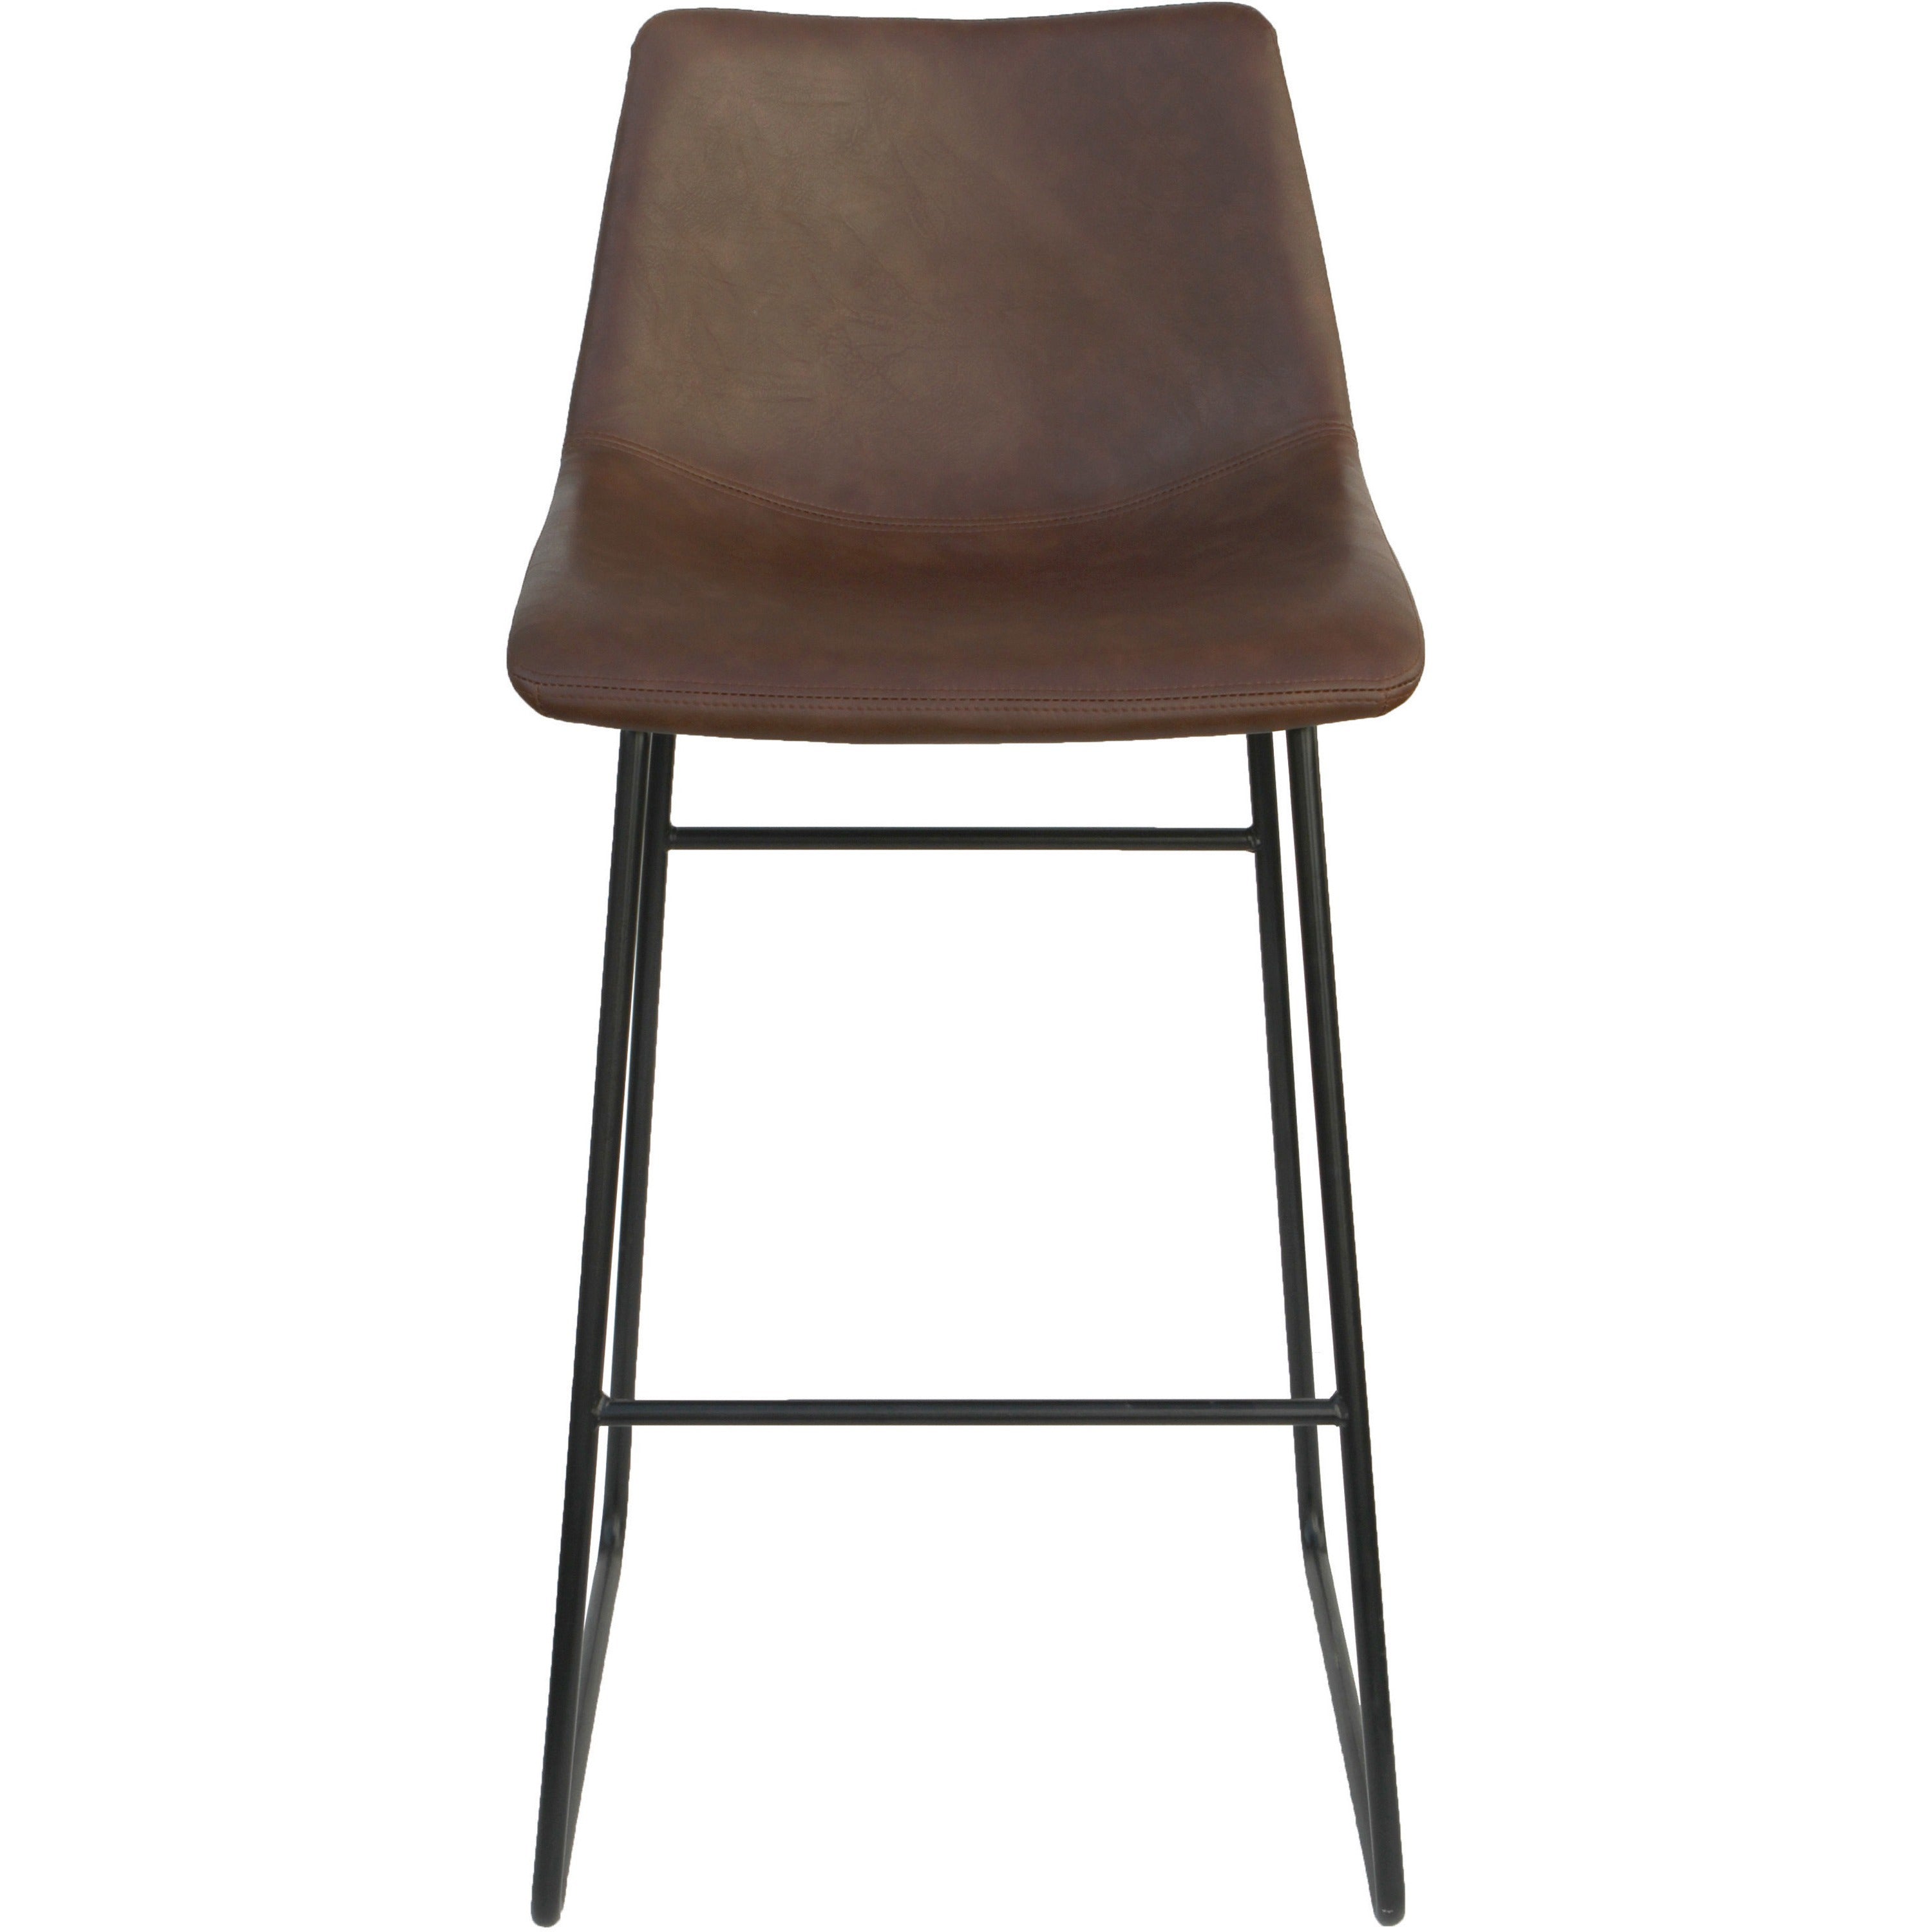 lorell-sled-guest-stools-tan-bonded-leather-seat-mid-back-sled-base-tan-bonded-leather-2-carton_llr42958 - 2